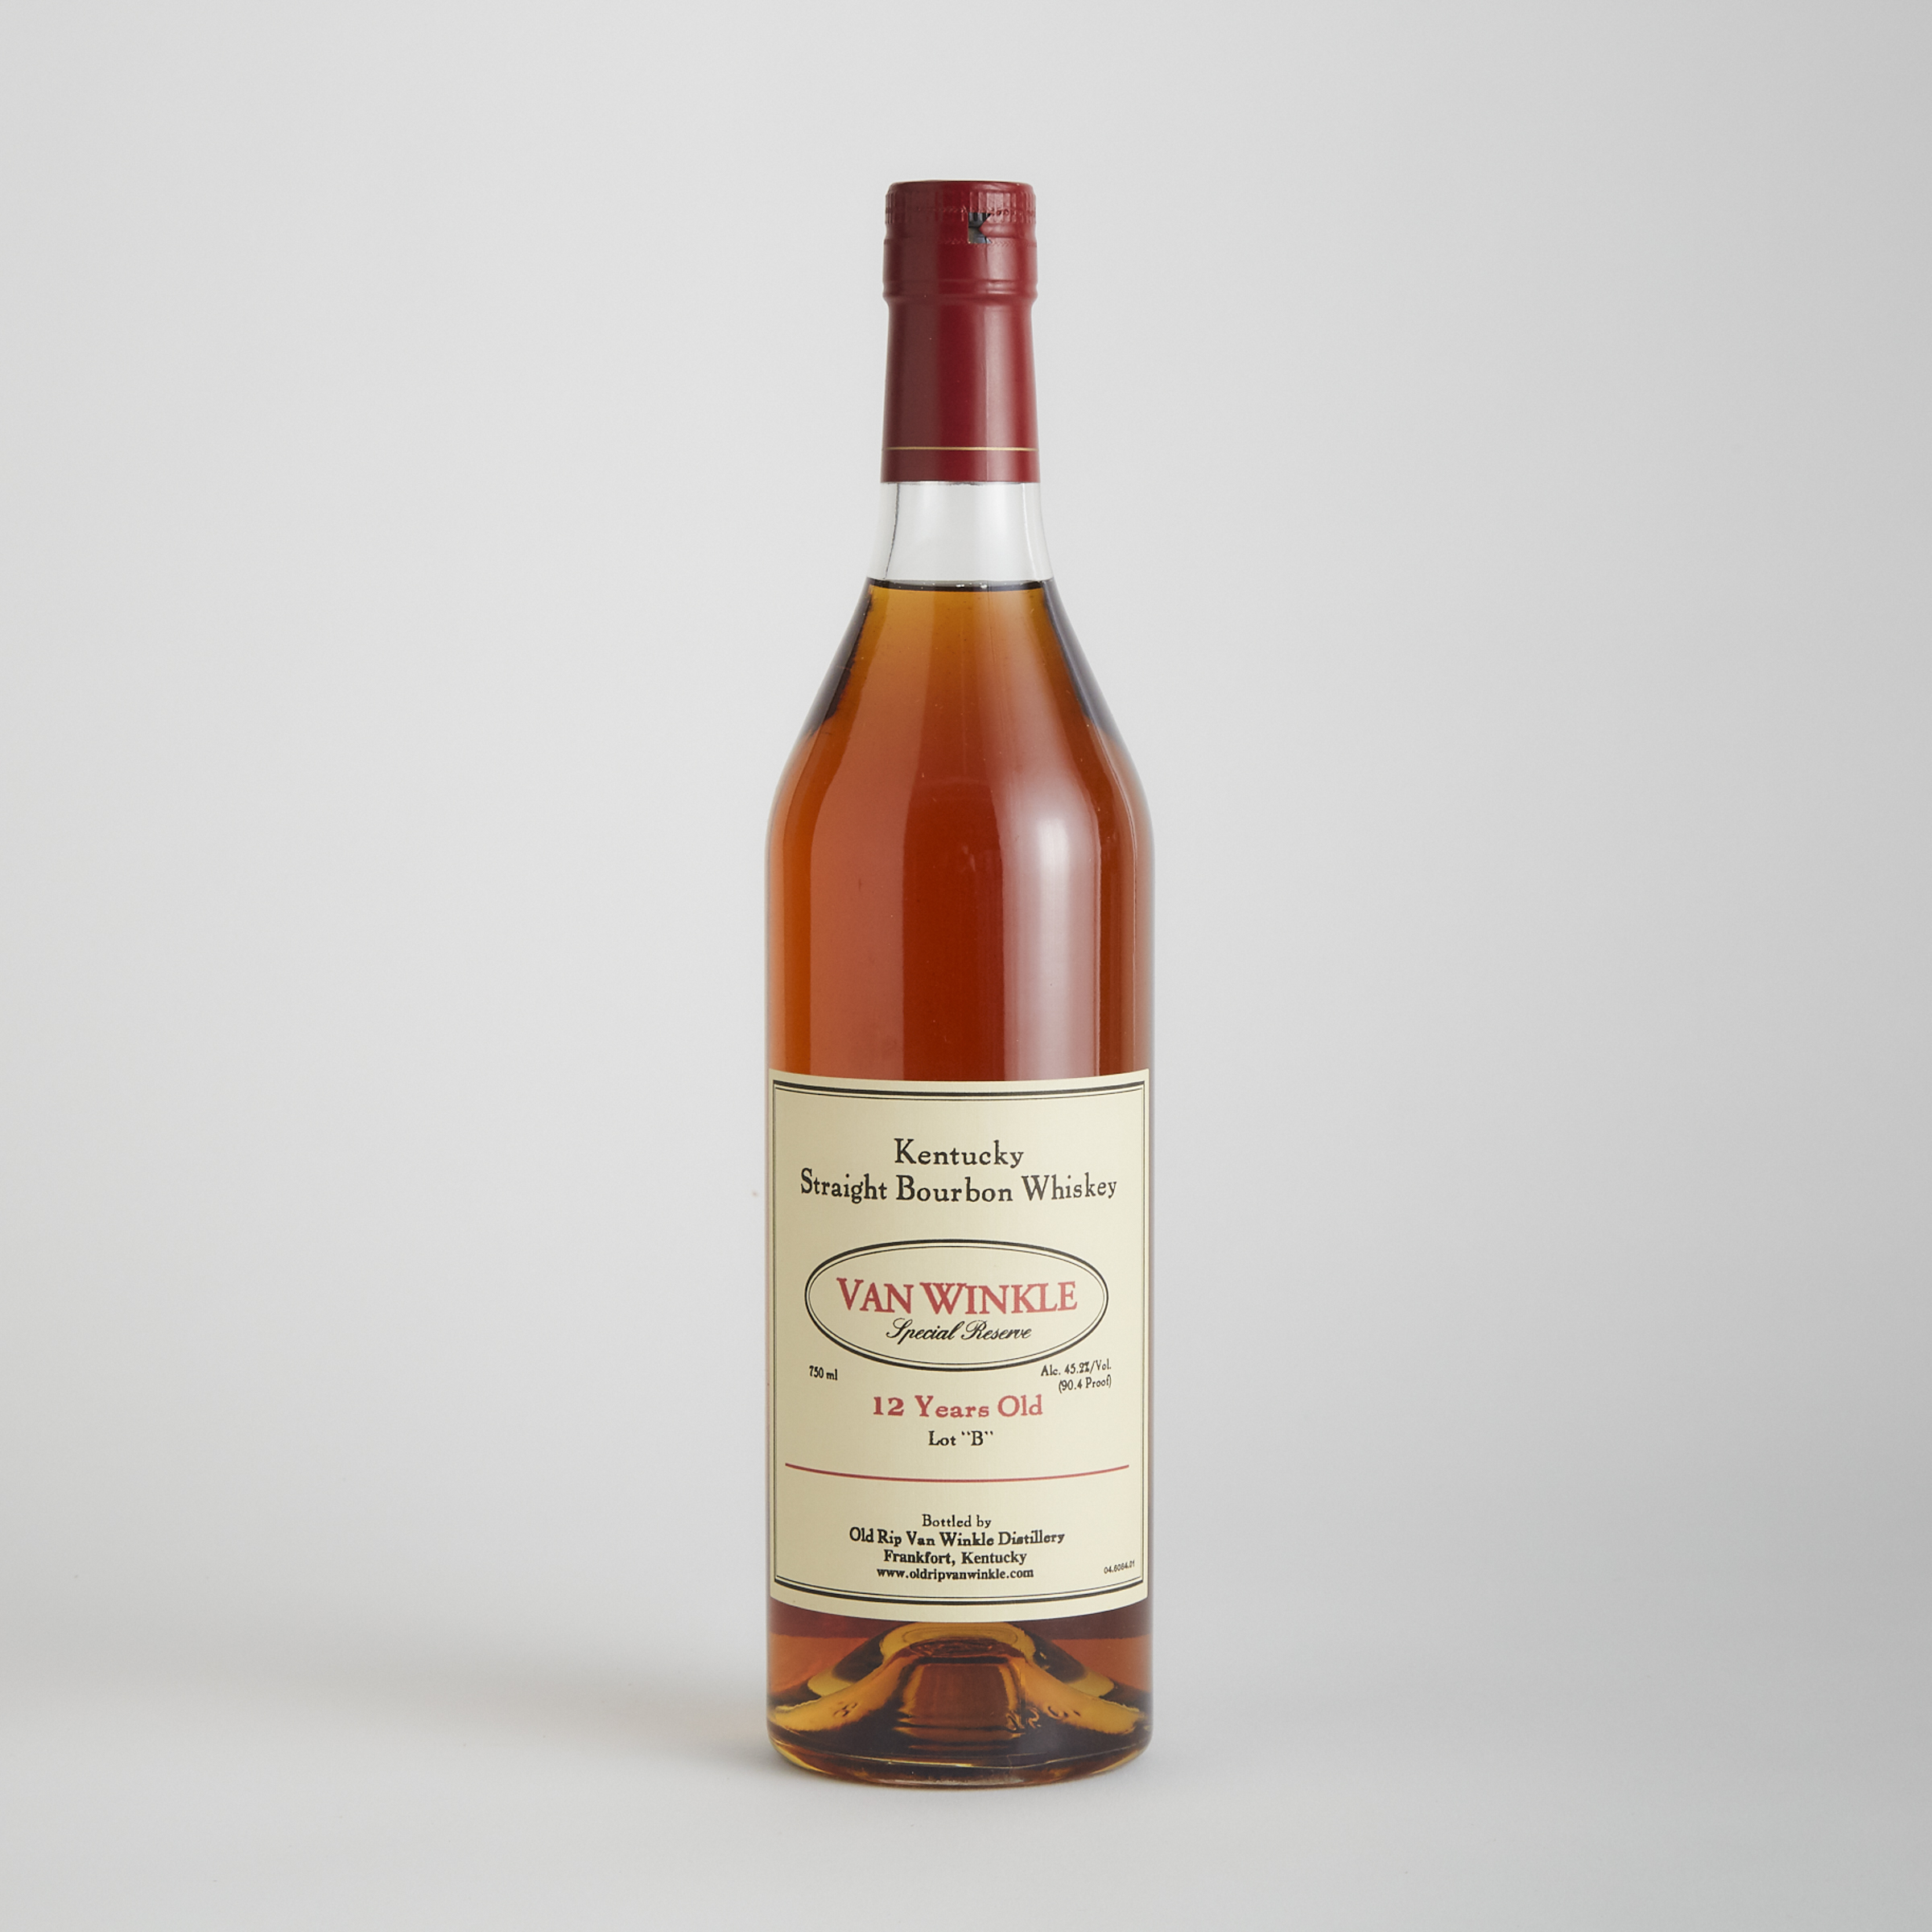 VAN WINKLE SPECIAL RESERVE KENTUCKY STRAIGHT BOURBON WHISKEY LOT “B” 12 YEARS (ONE 750 ML)